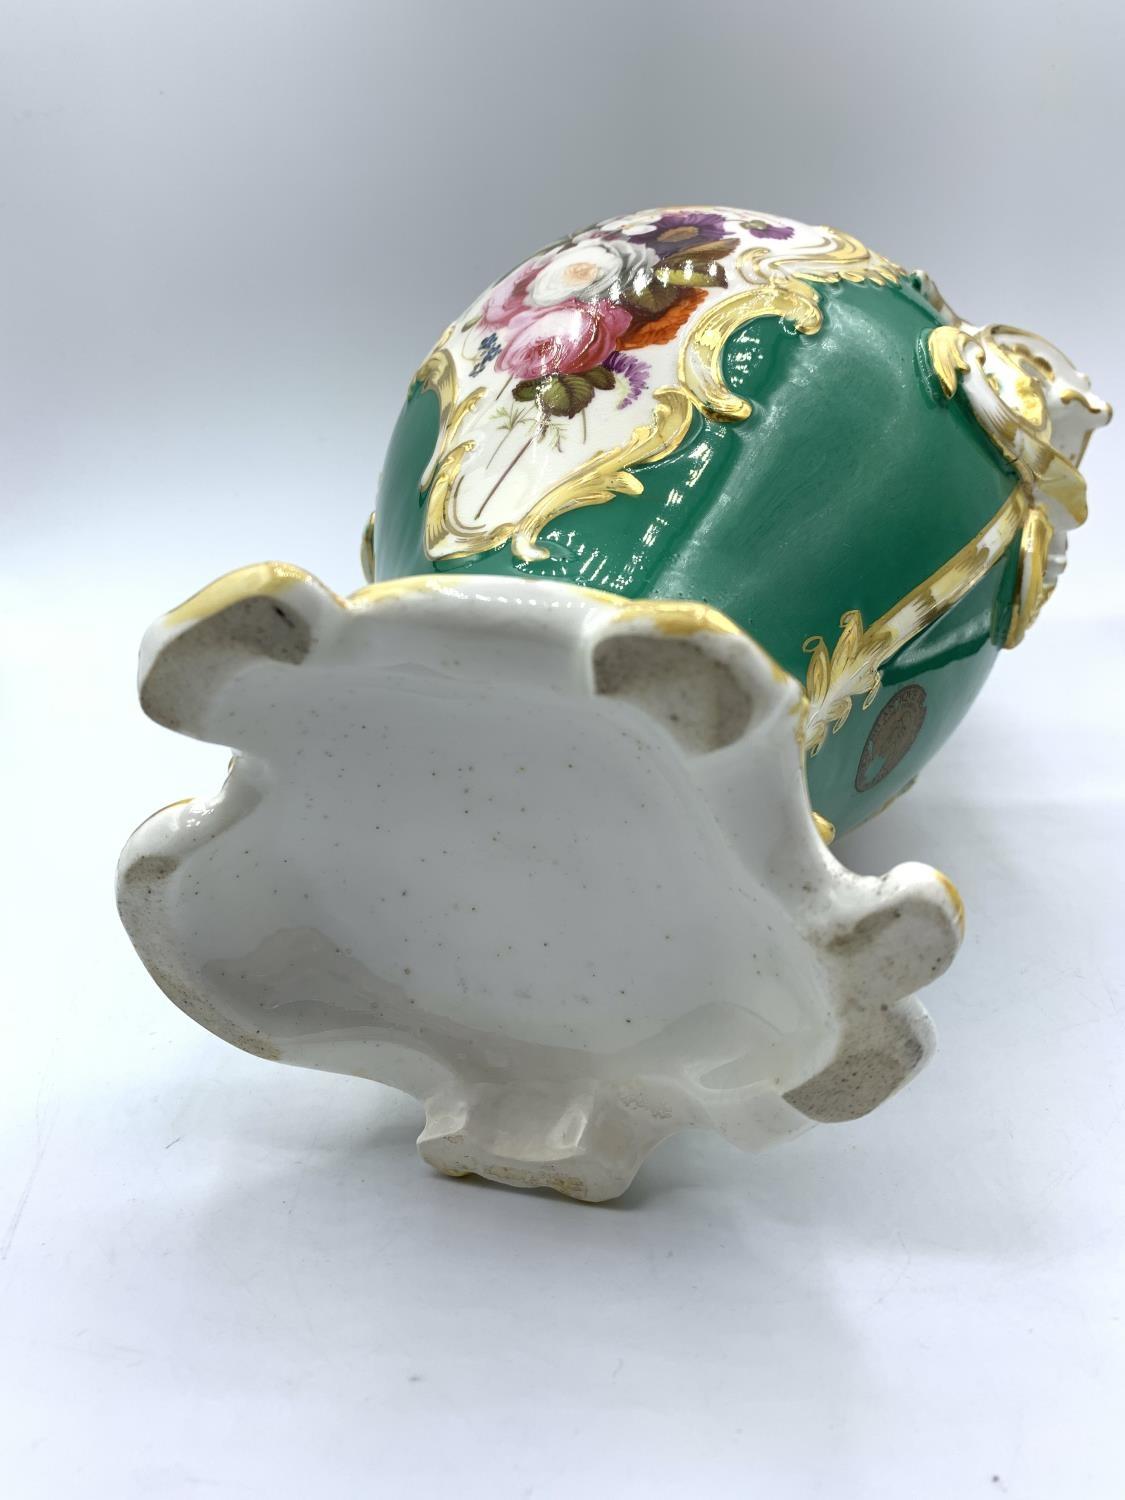 Green Baroque style Vase with Floral print and handles, circa 1880, 23cm tall - Image 6 of 7